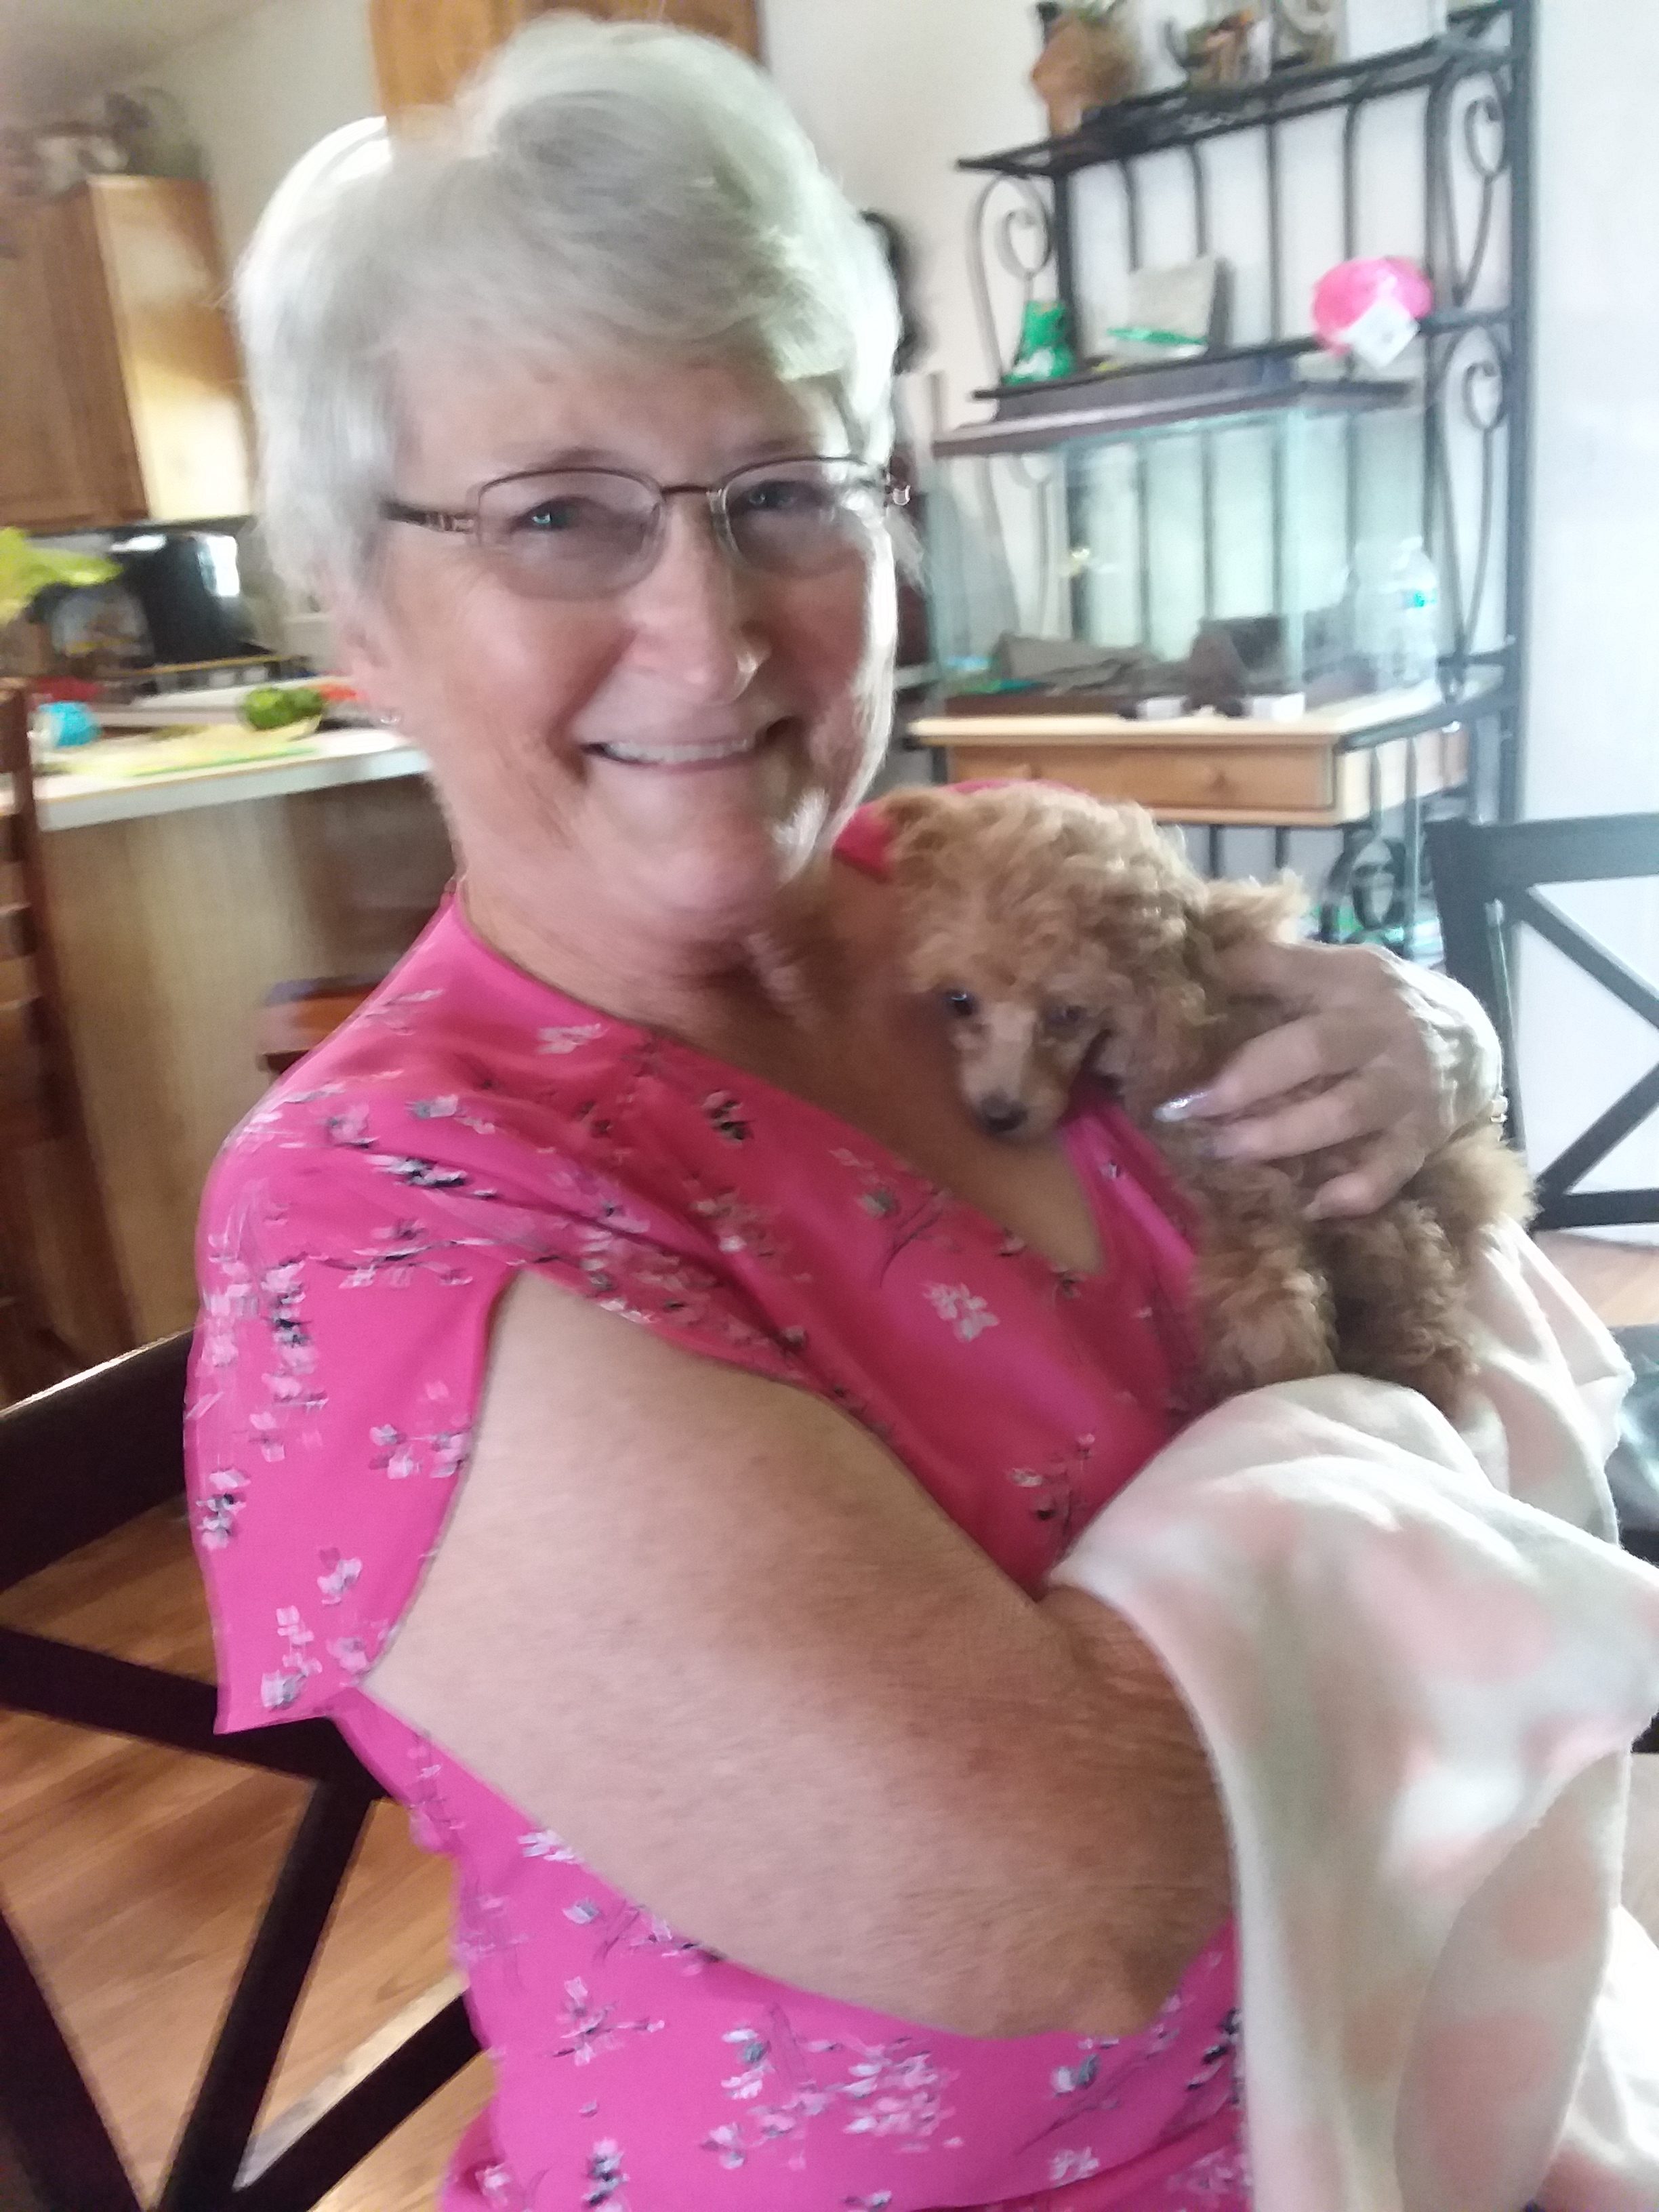 Anita found her new BFF Beyonce' on 8-24-19